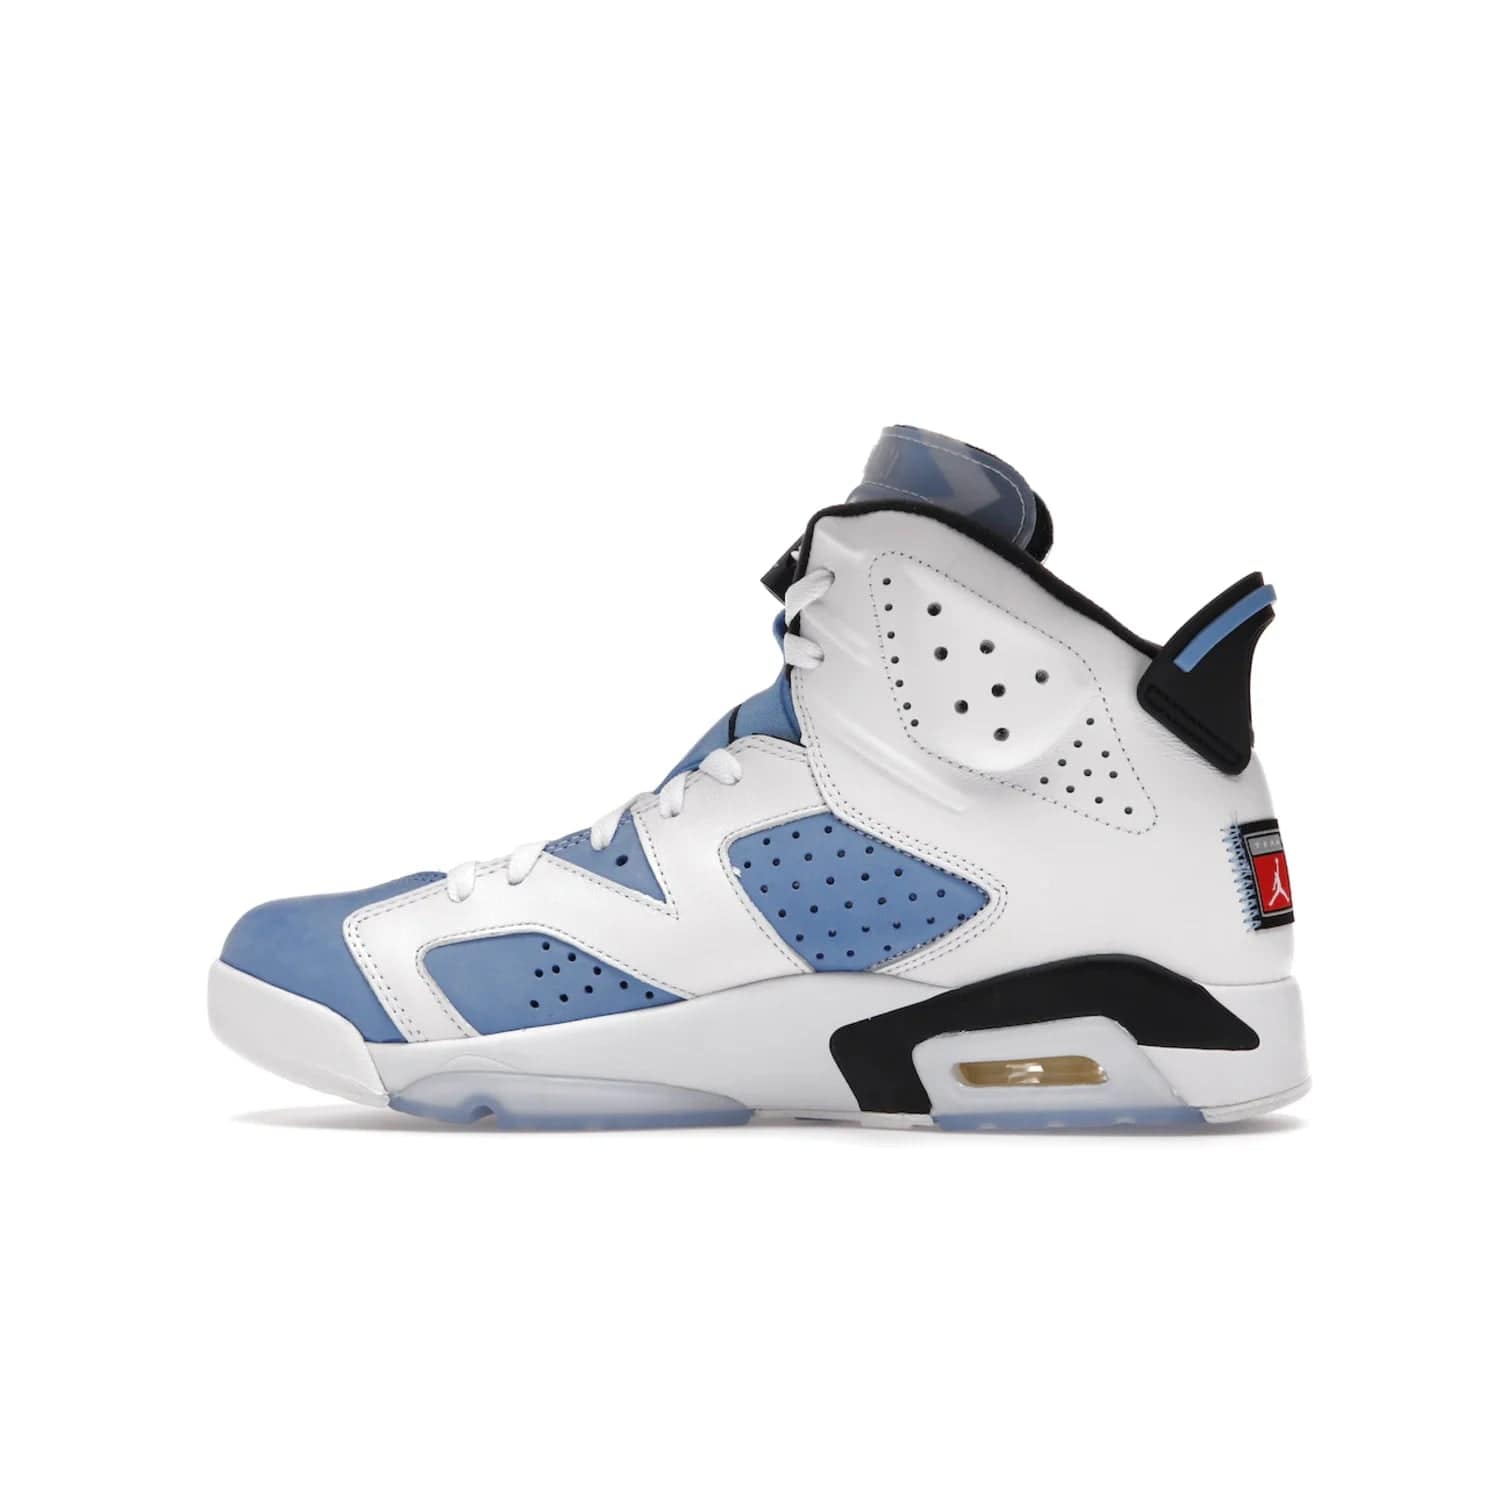 Jordan 6 Retro UNC White - Image 20 - Only at www.BallersClubKickz.com - Air Jordan 6 Retro UNC White with classic UNC colors brings nostalgia and style to a legendary silhouette. Celebrate MJ's alma mater with navy blue accents, icy semi-translucent sole and Jordan Team patch. Out March 2022 for the Sneaker Enthusiast.